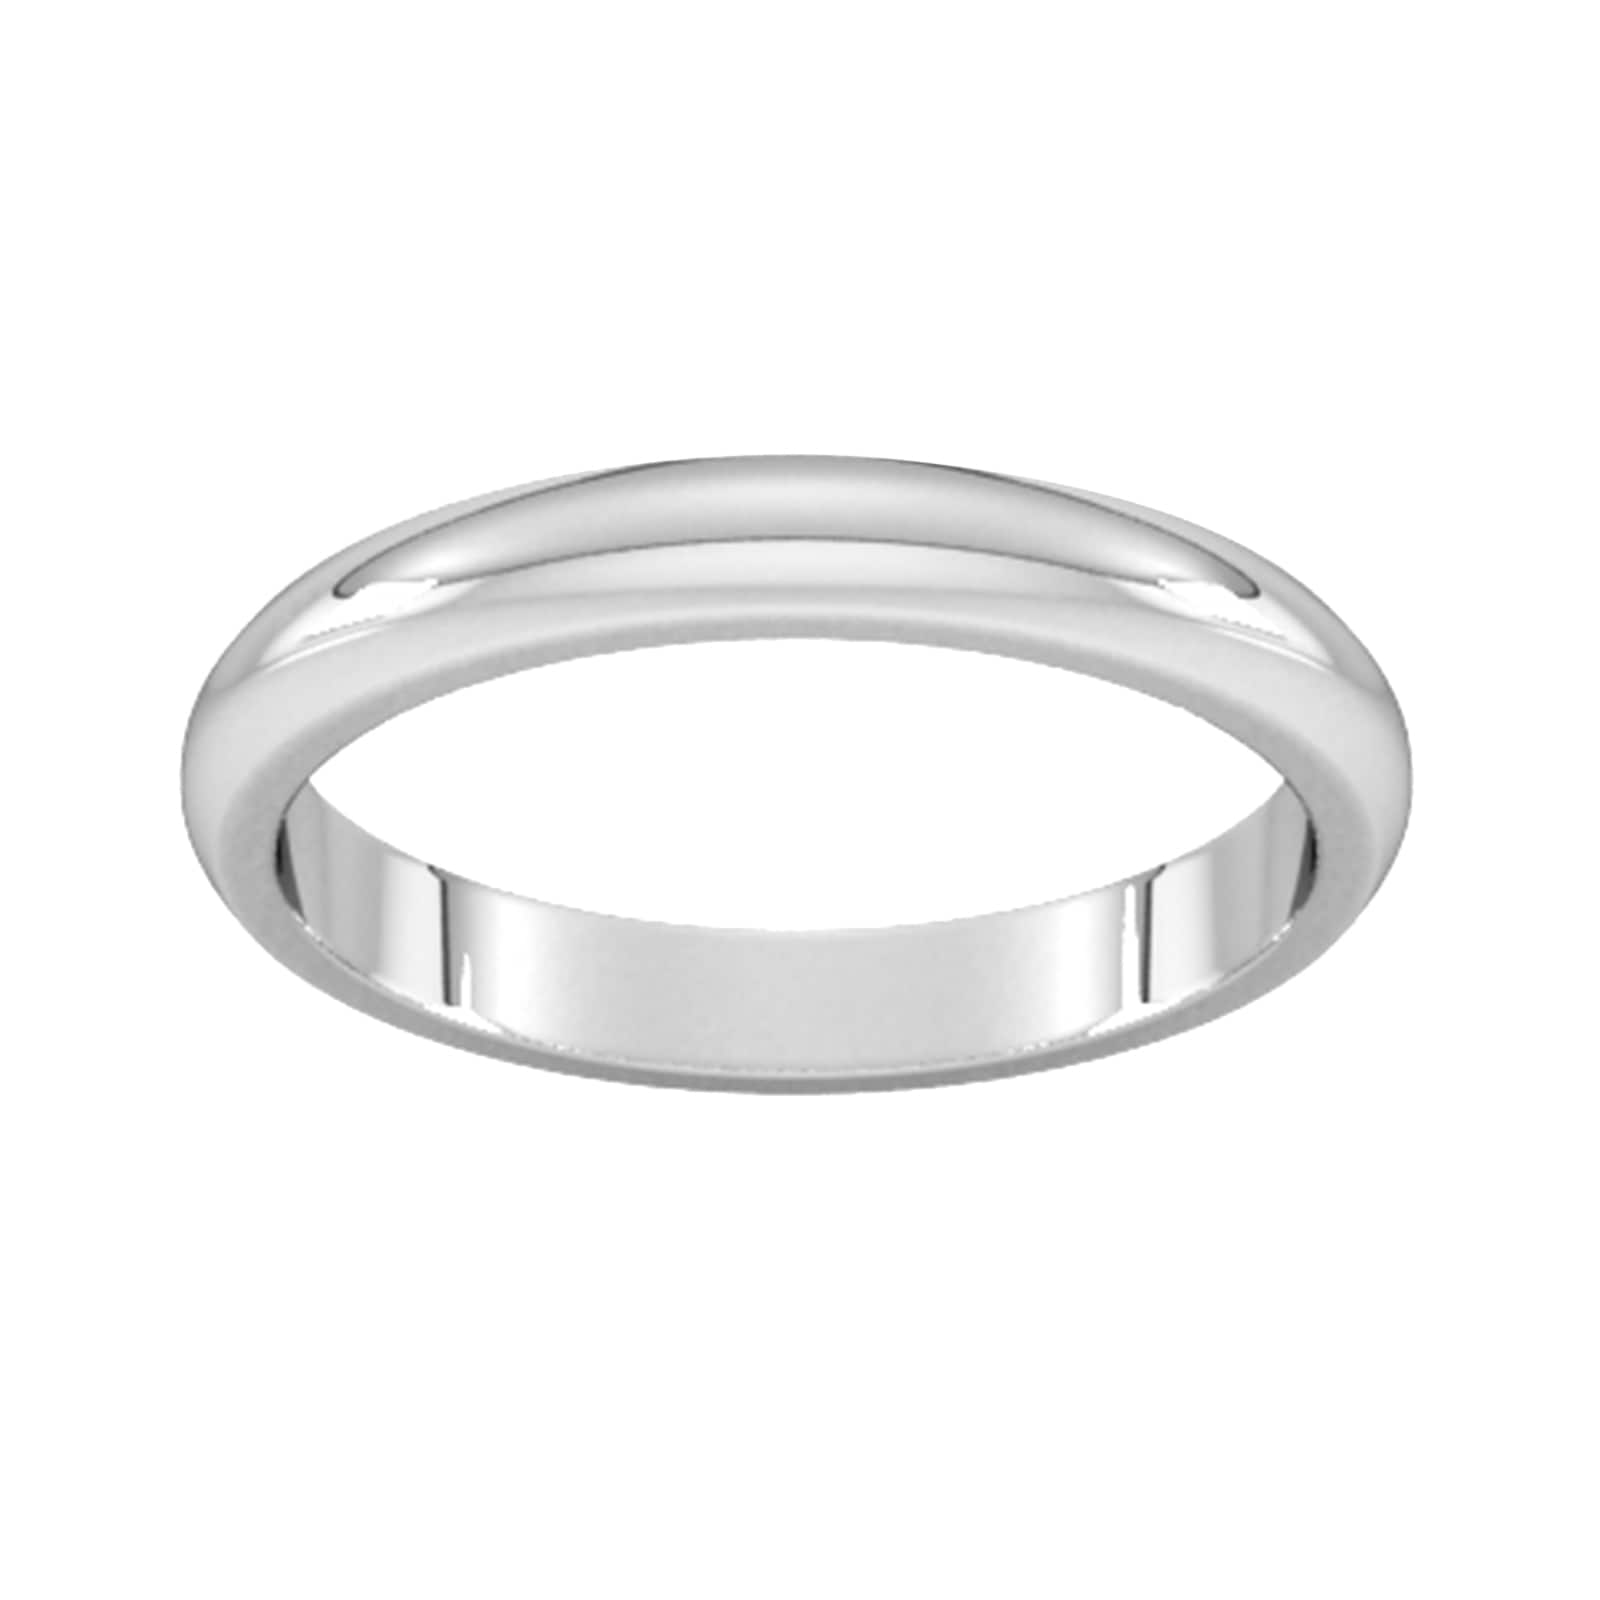 3mm D Shape Heavy Wedding Ring In 18 Carat White Gold - Ring Size U